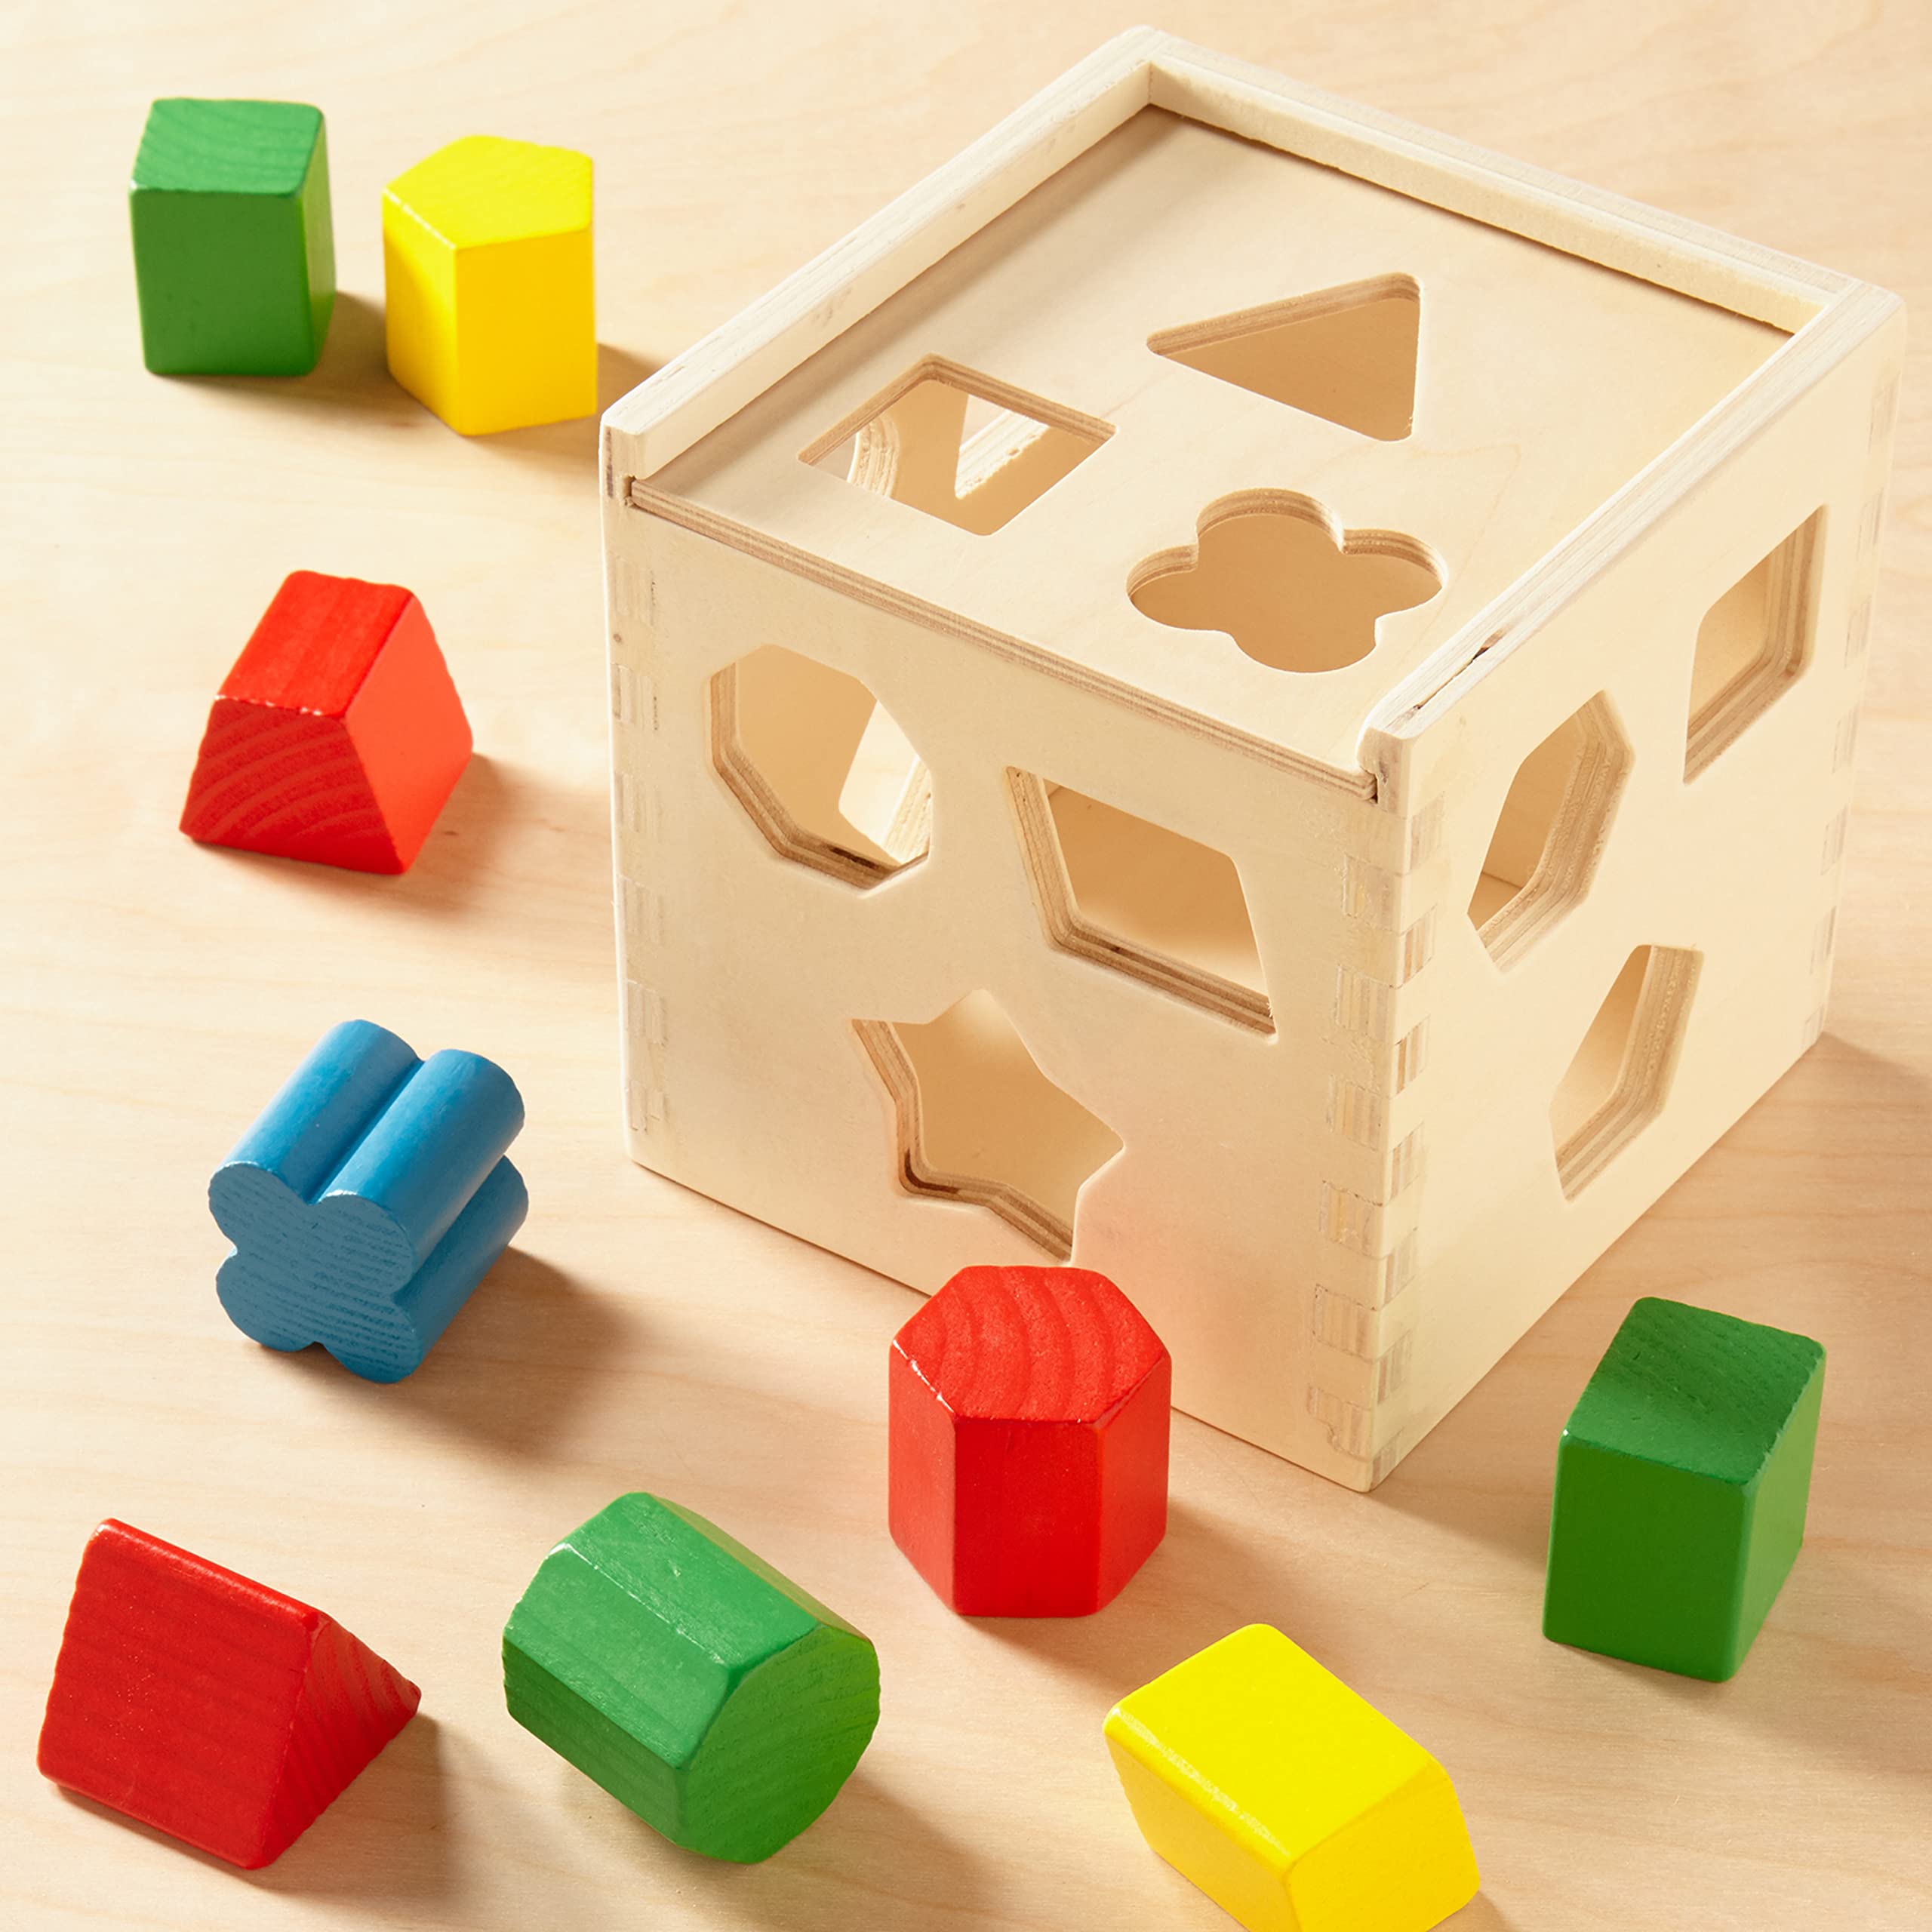 Melissa & Doug Shape Sorting Cube - Classic Wooden Toy With 12 Shapes - Kids Shape Sorter Toys For Toddlers Ages 2+